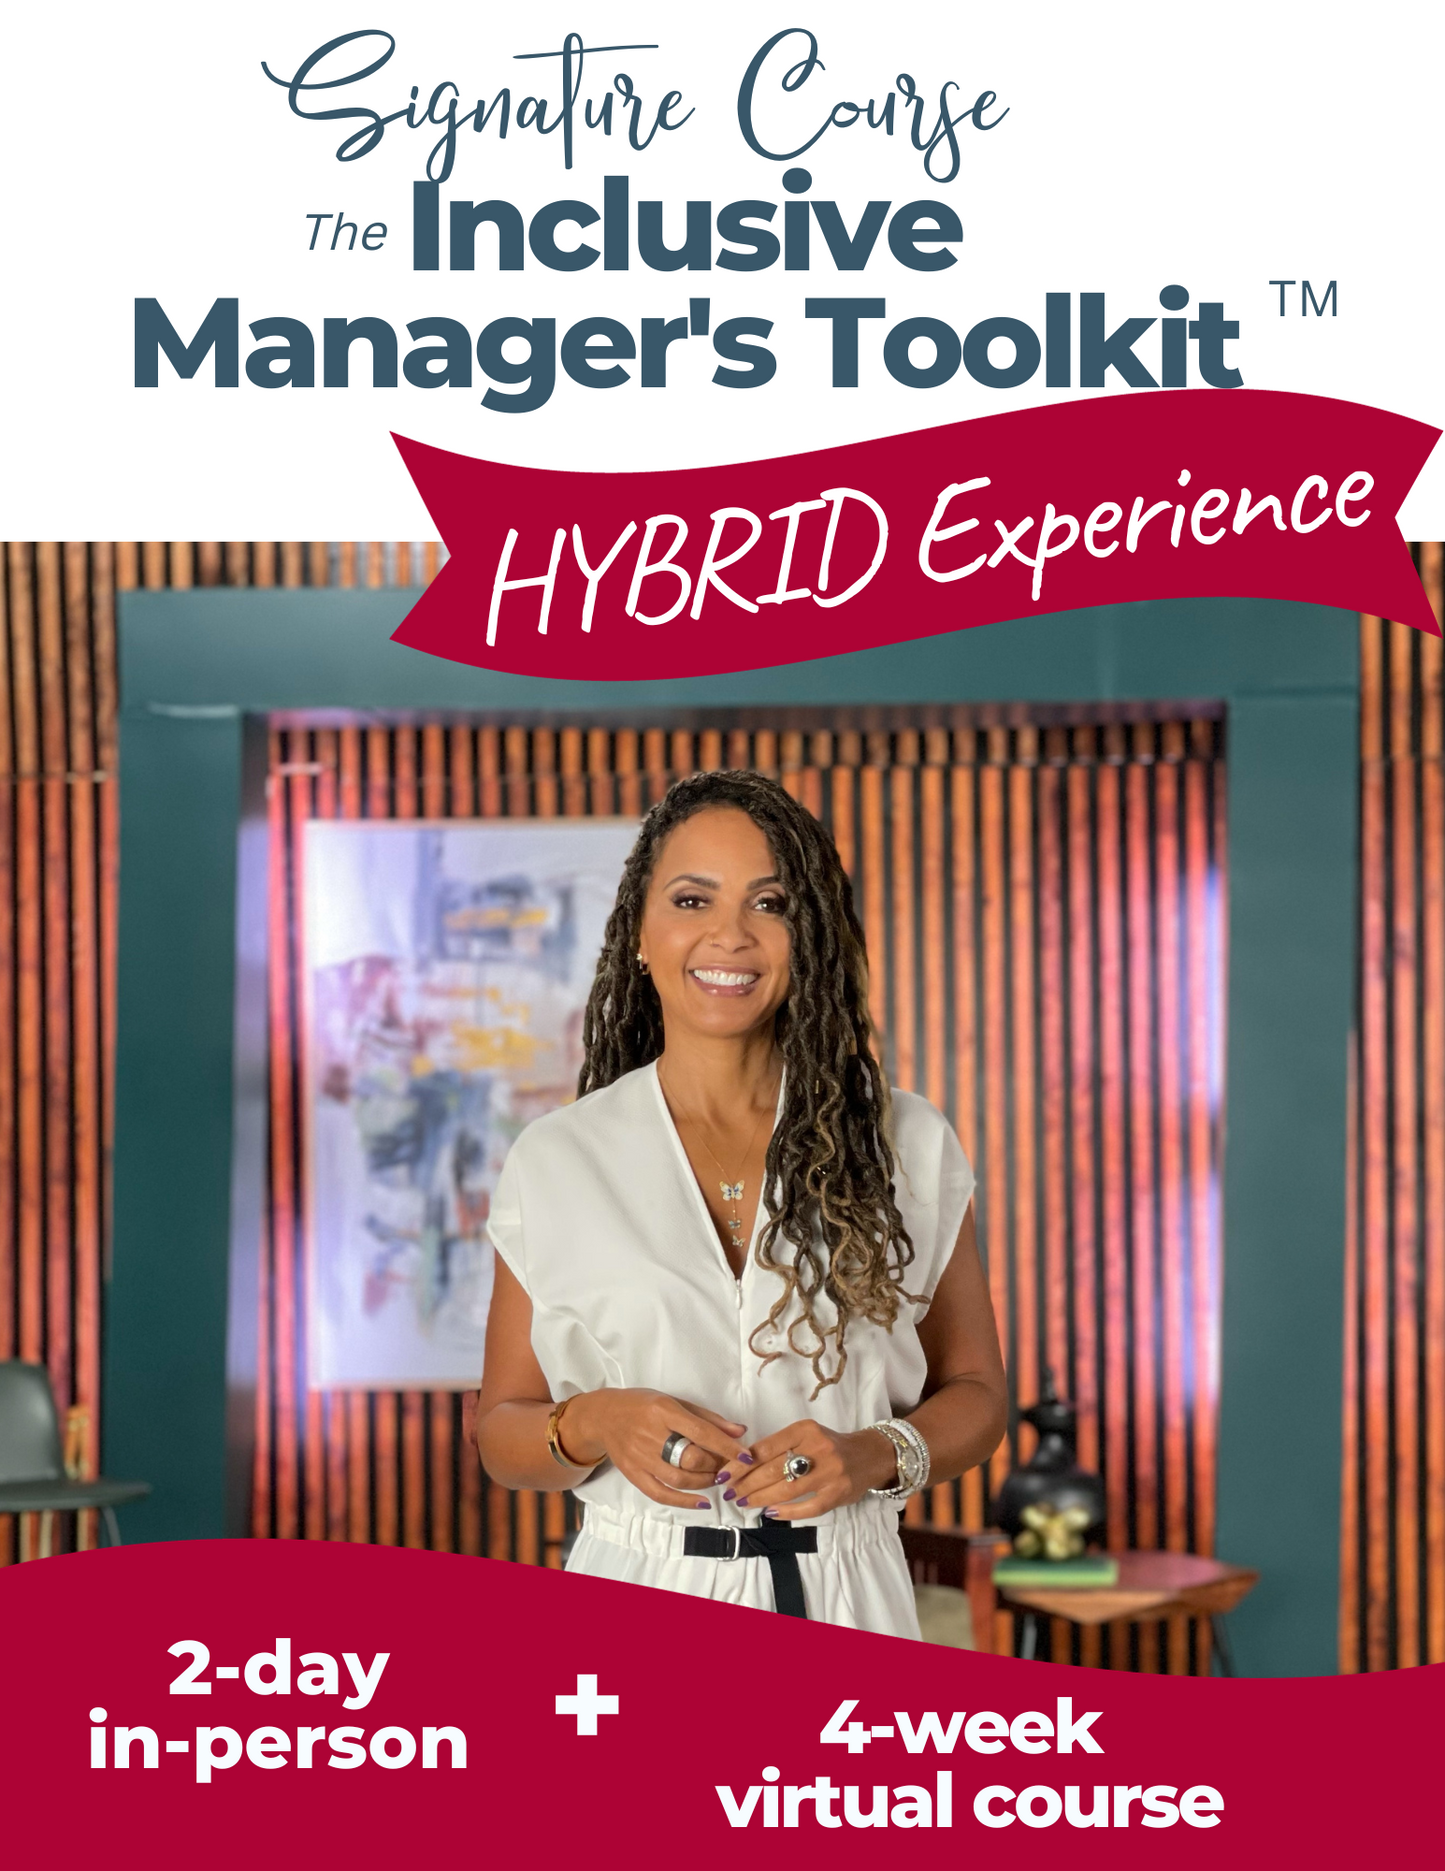 The Inclusive Manager's Toolkit: A Hybrid Experience